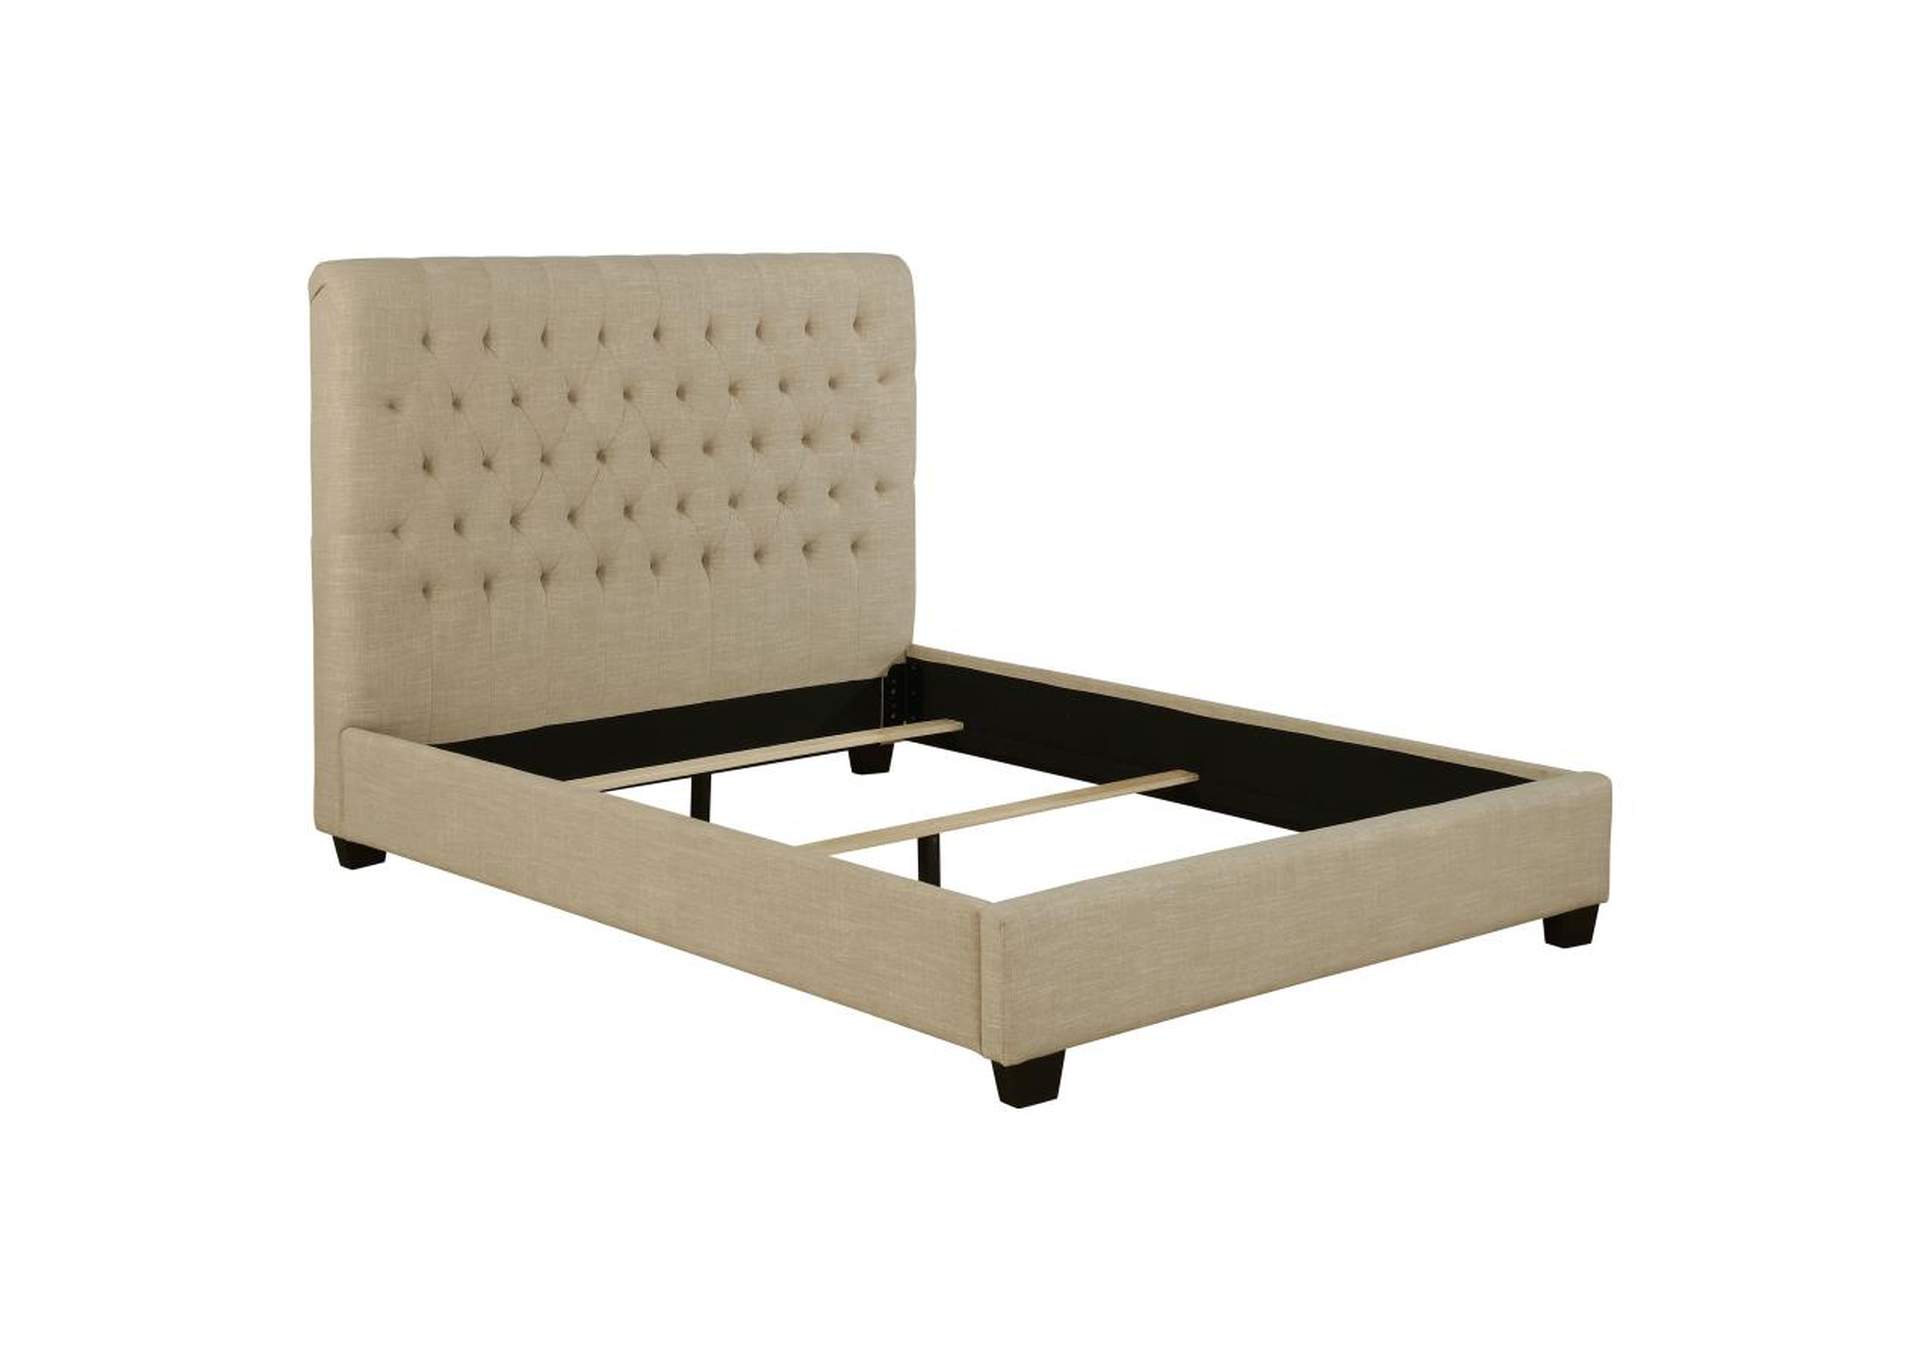 Chloe Tufted Upholstered Queen Bed Oatmeal,Coaster Furniture